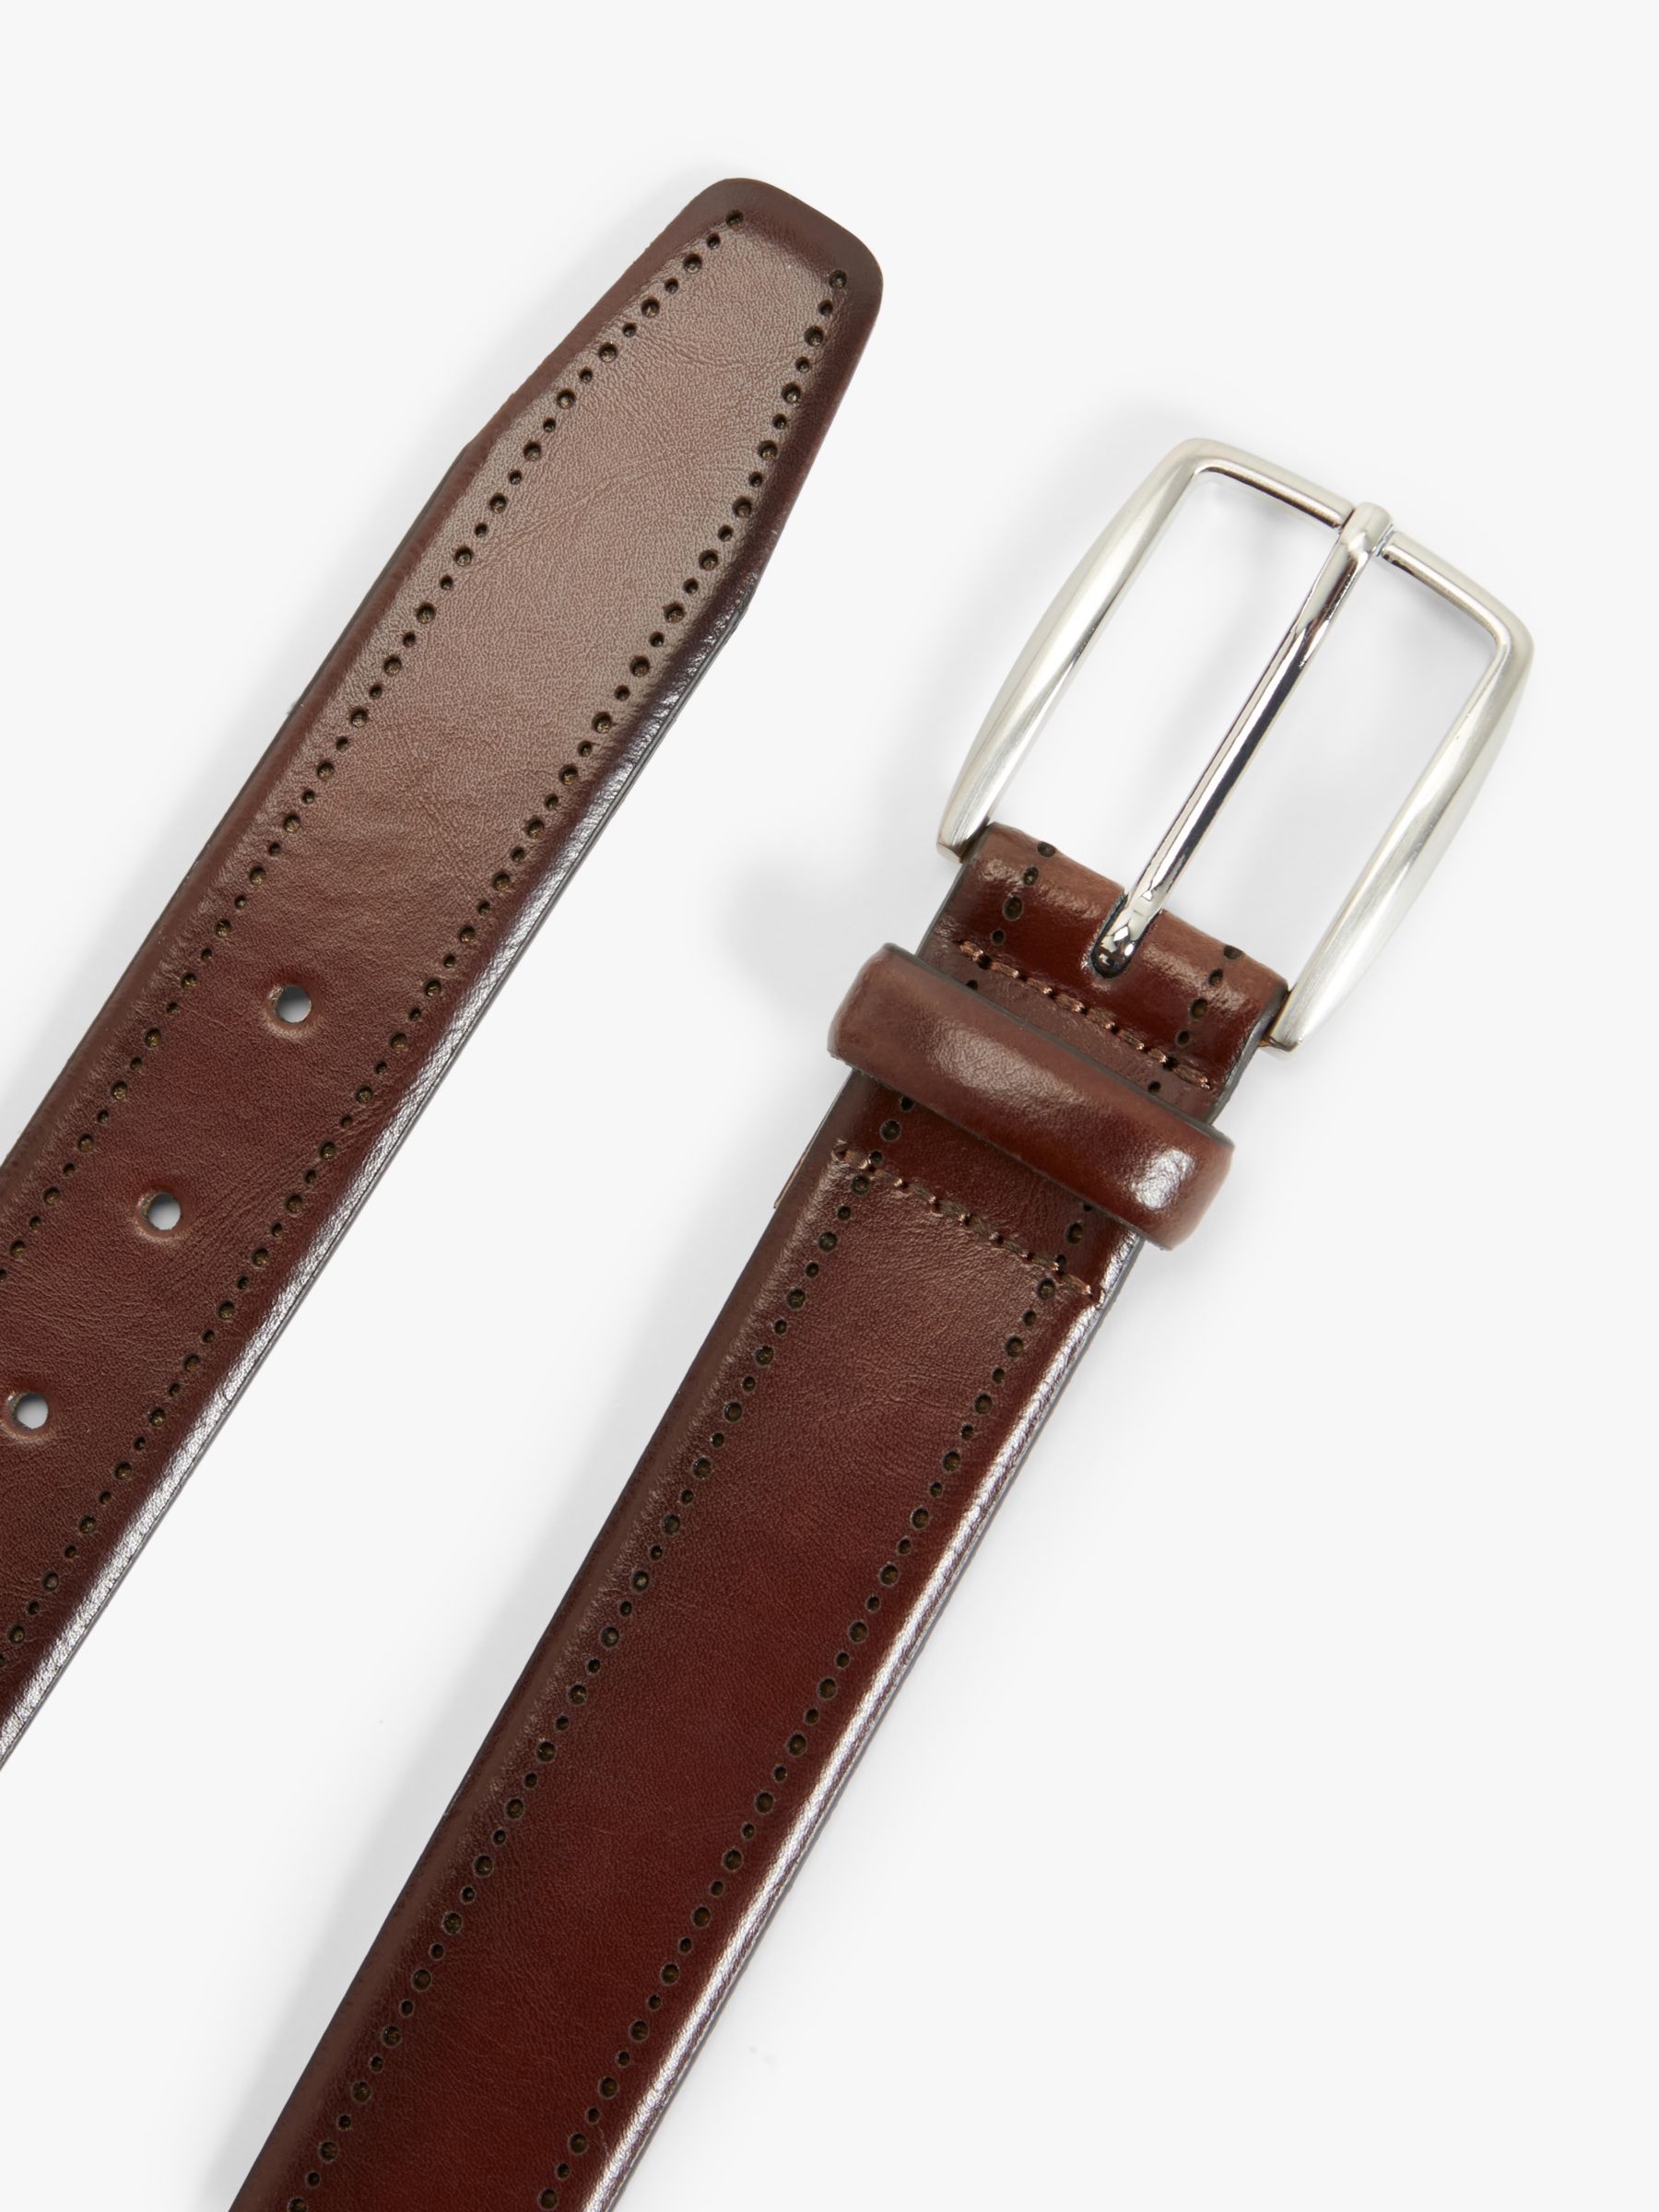 John Lewis Made in Italy 35mm Brogue Detail Leather Belt, Dark Brown, S